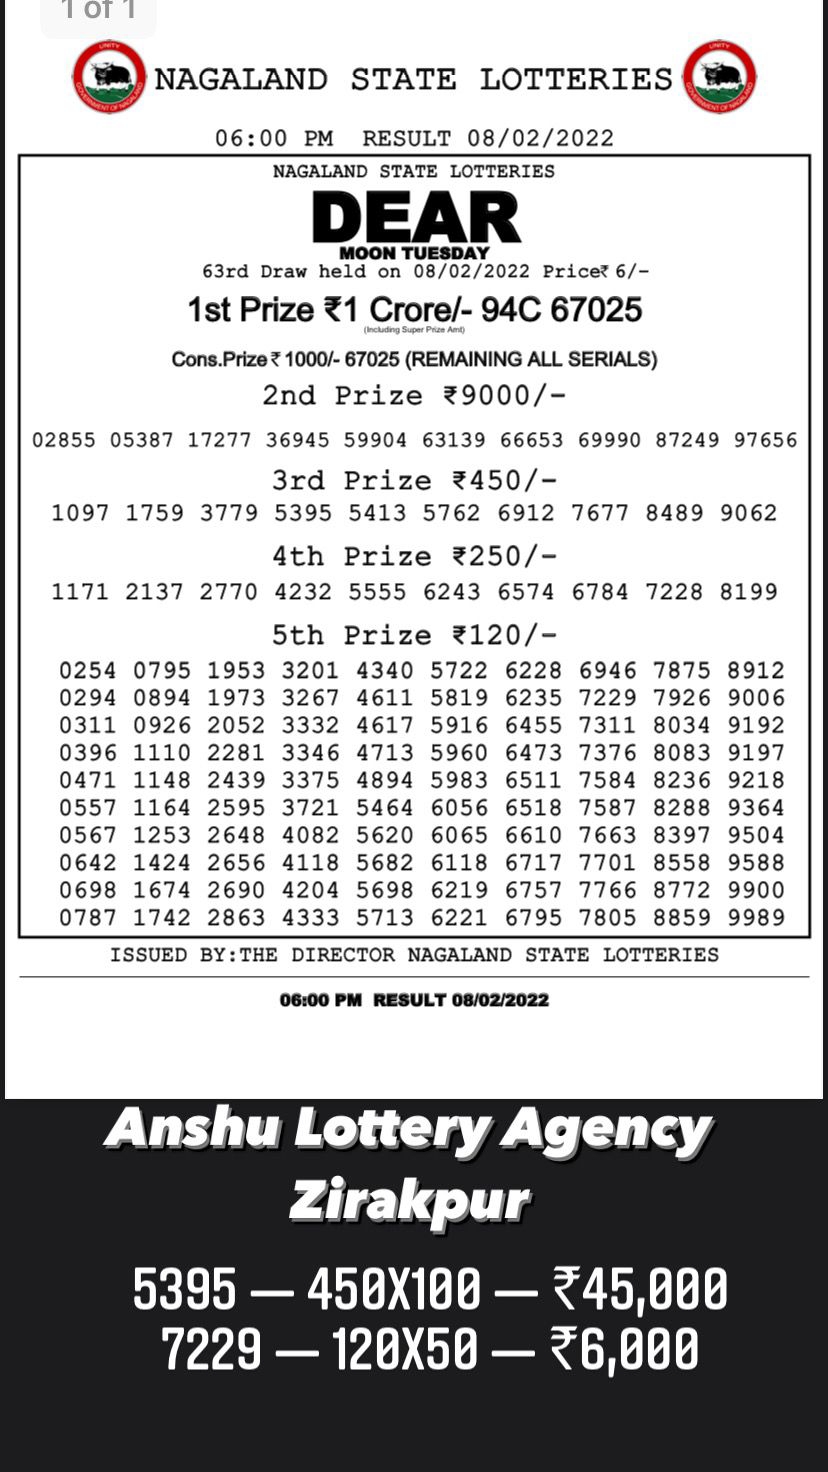 dear-daily-lottery-result-4pm-08-feb-2022/